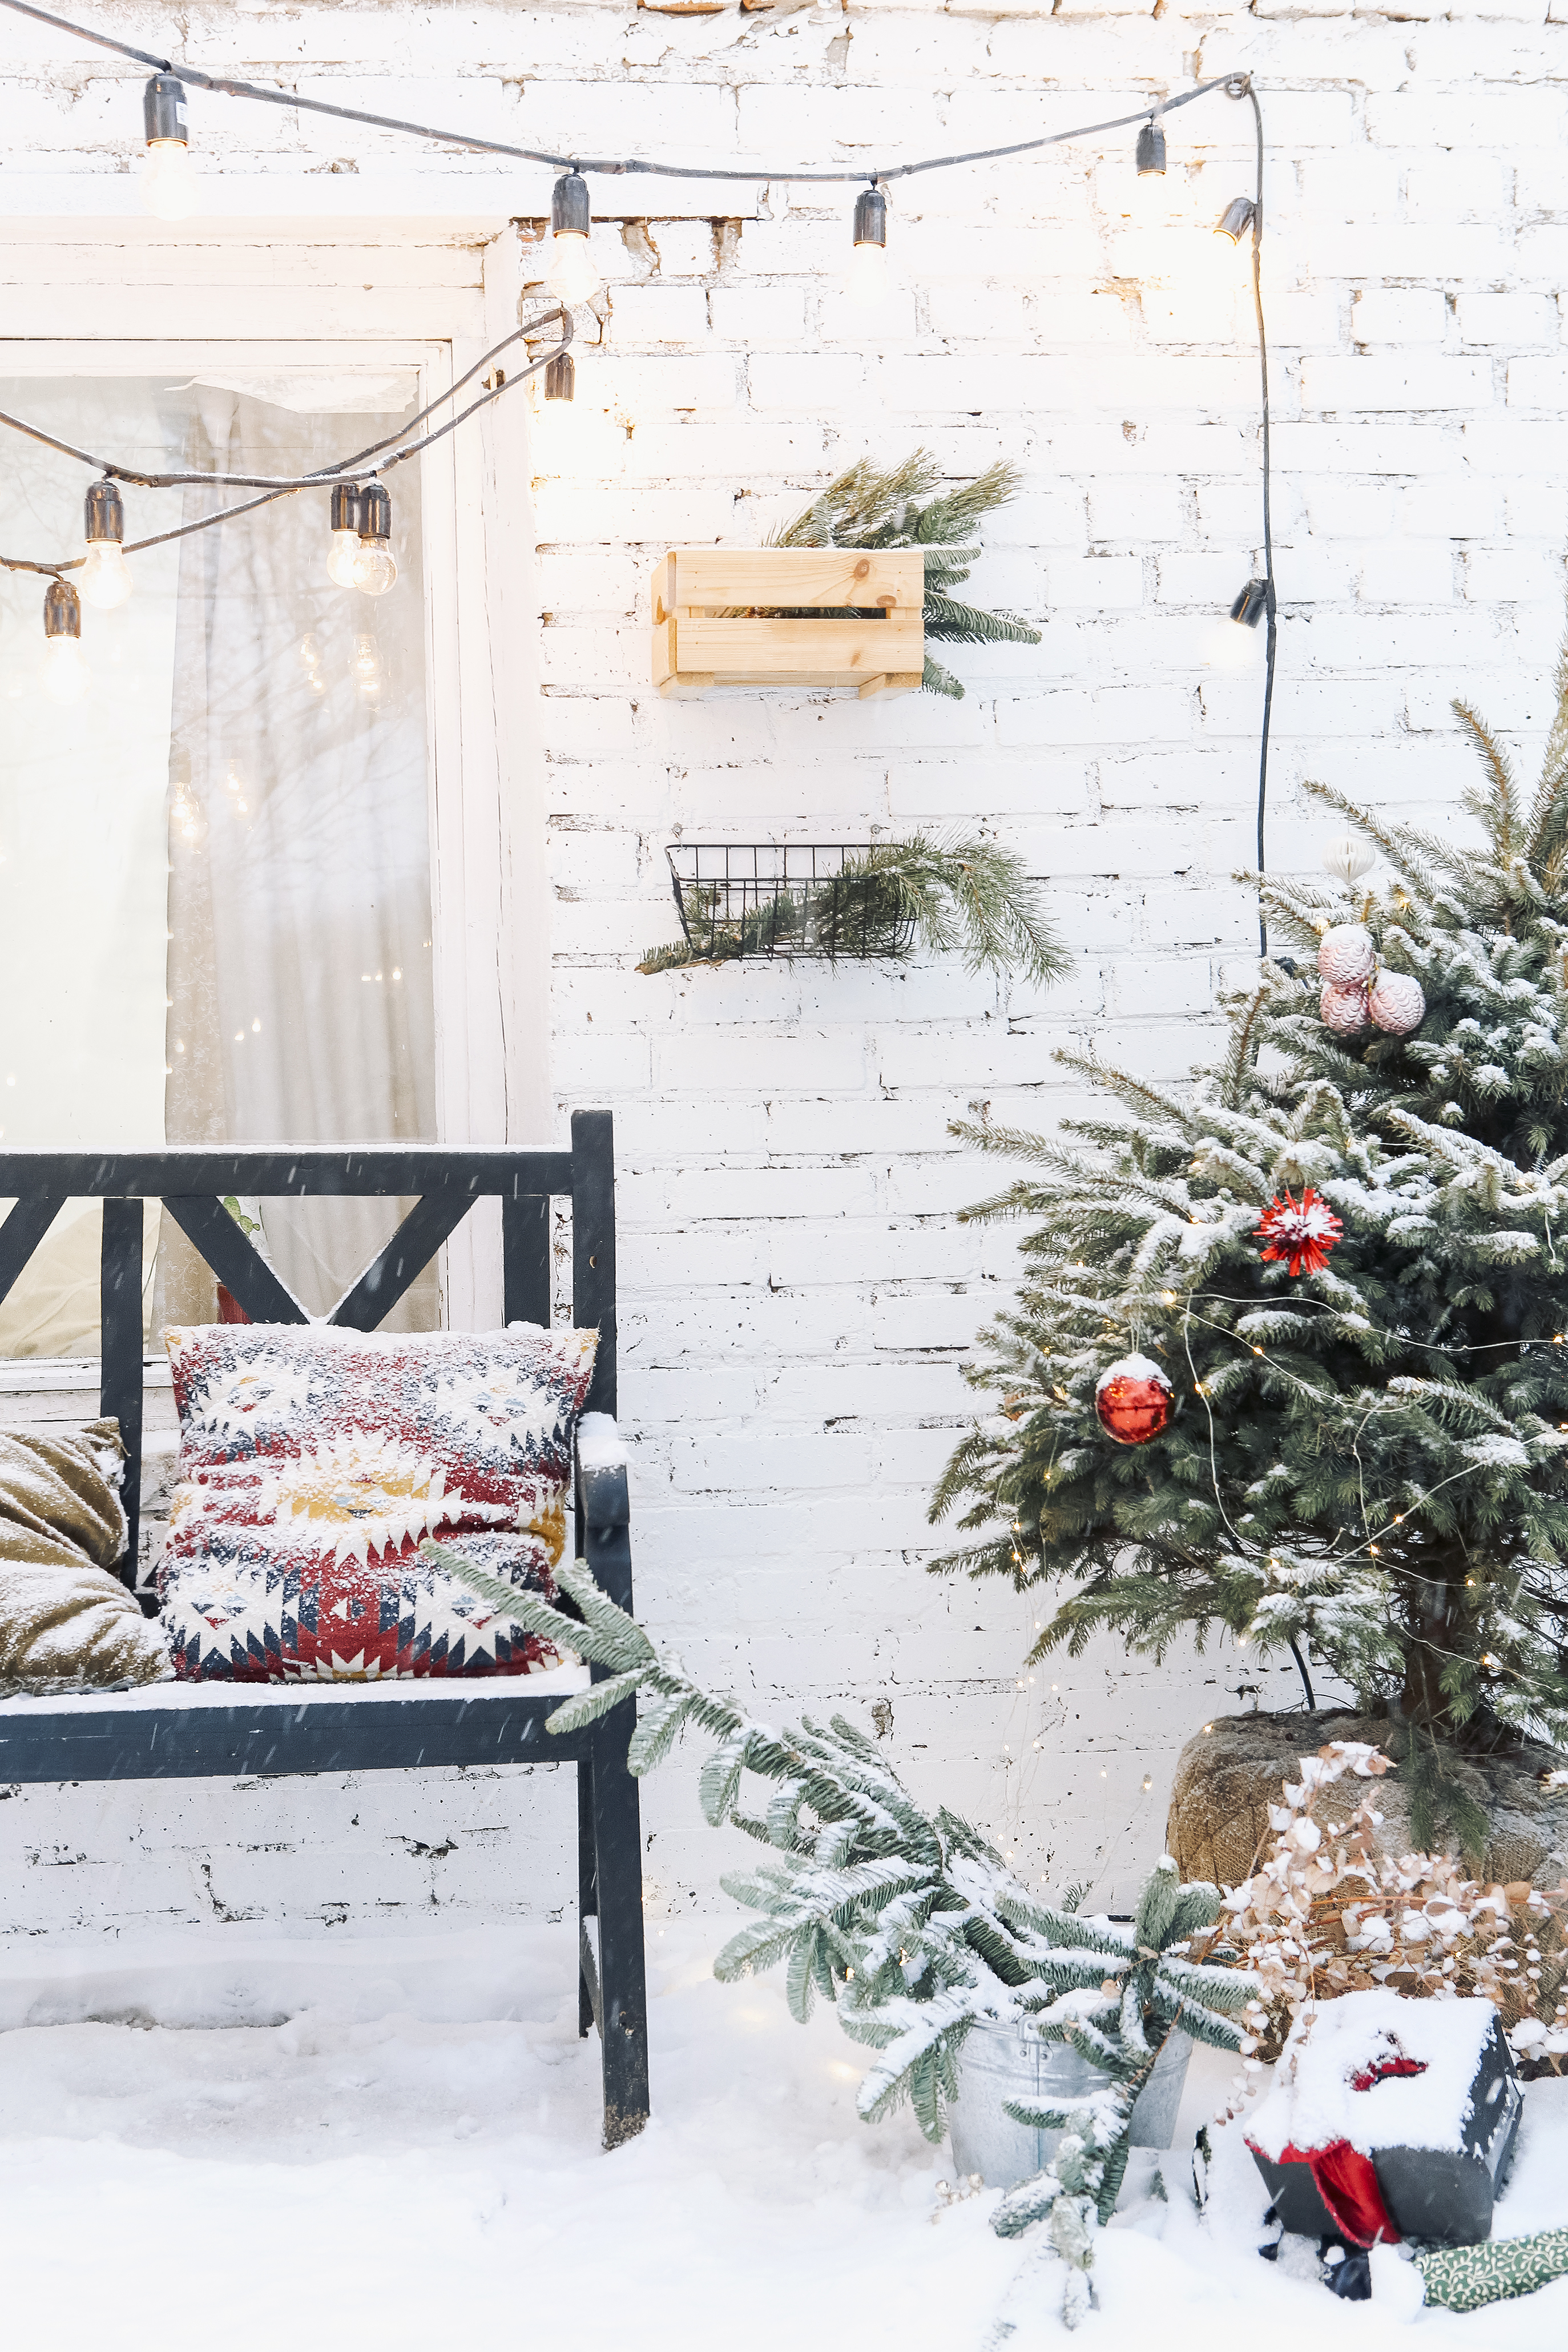 How to Decorate an Apartment Balcony for Christmas: 17 Awe-Inspiring Ideas